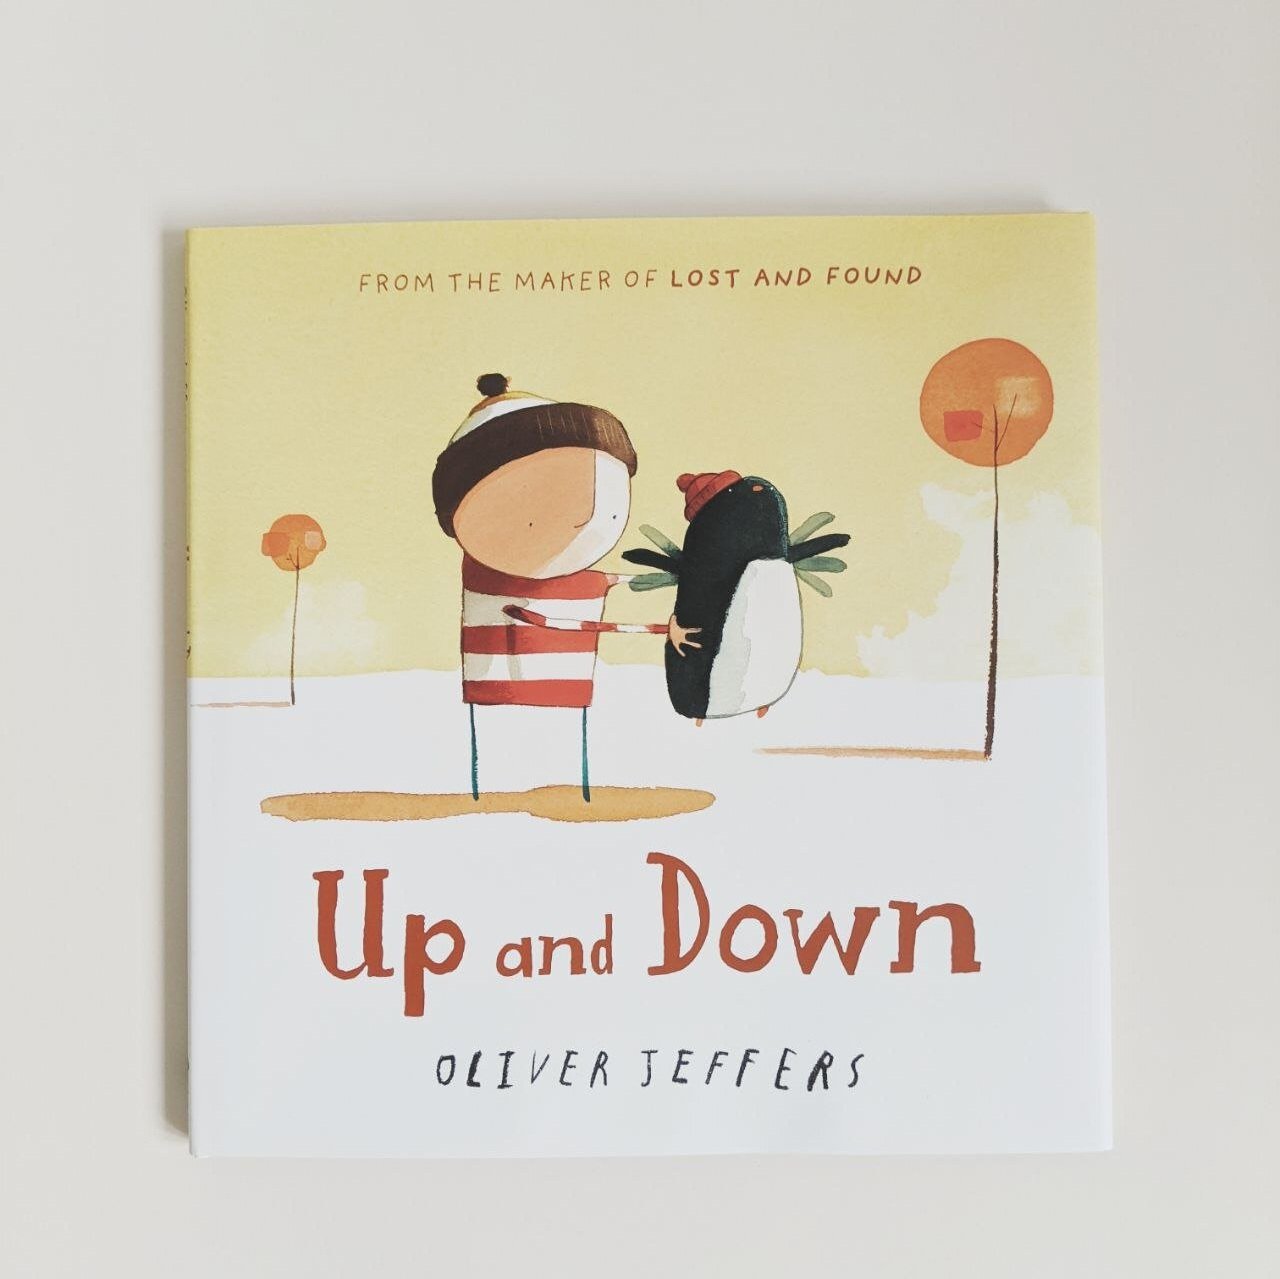 Up and Down by Oliver Jeffers